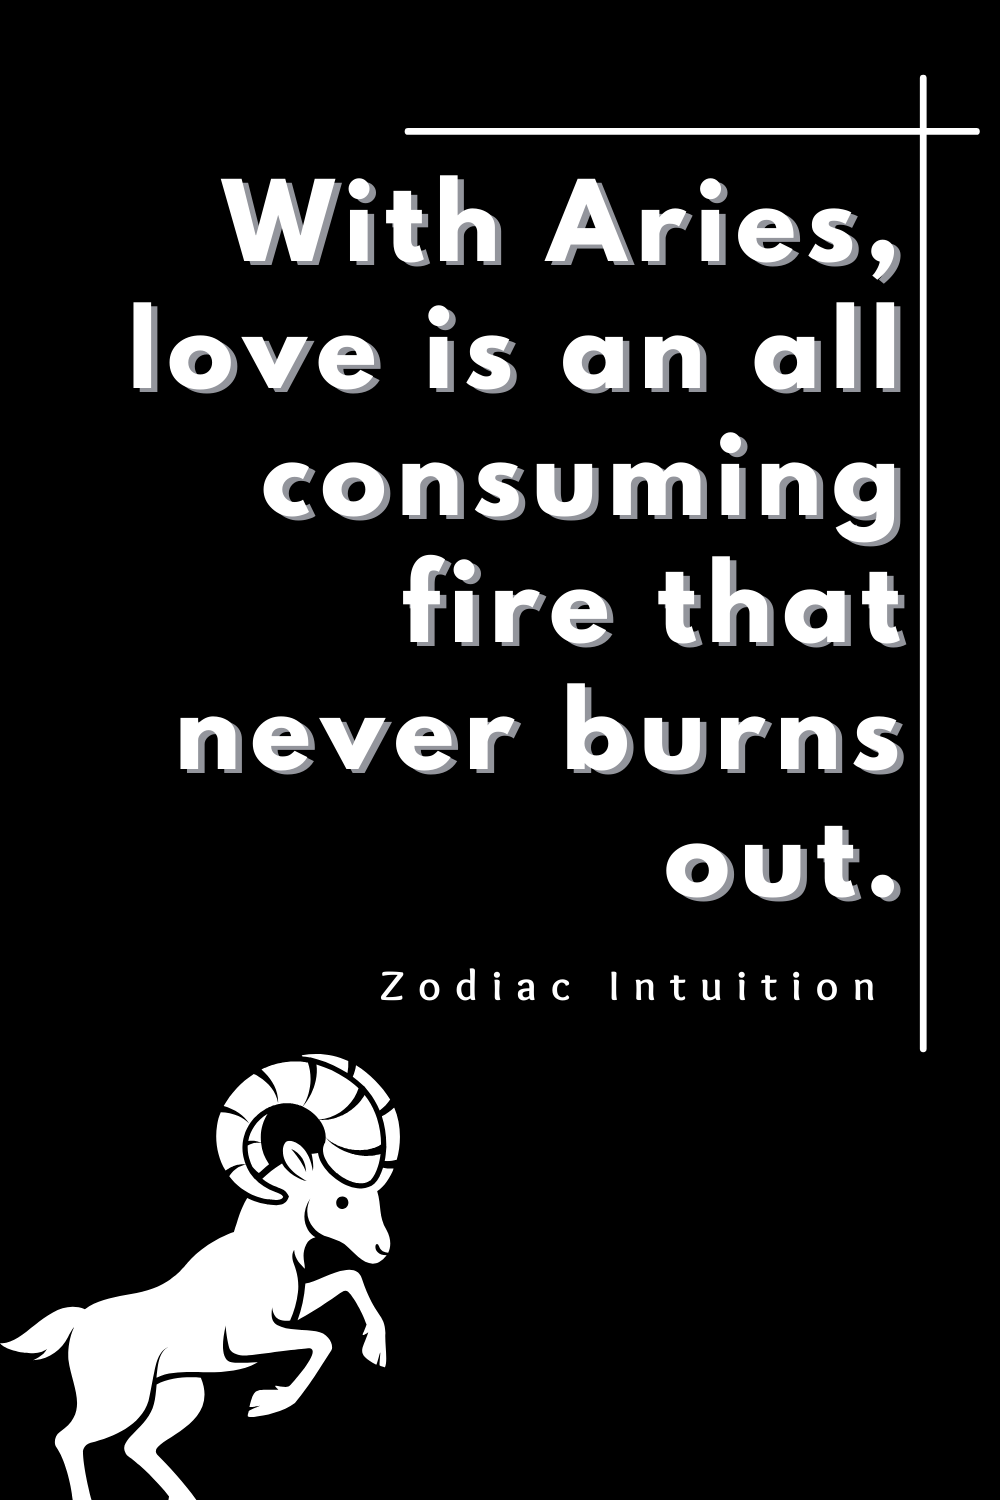 With Aries, love is an all consuming fire that never burns out.